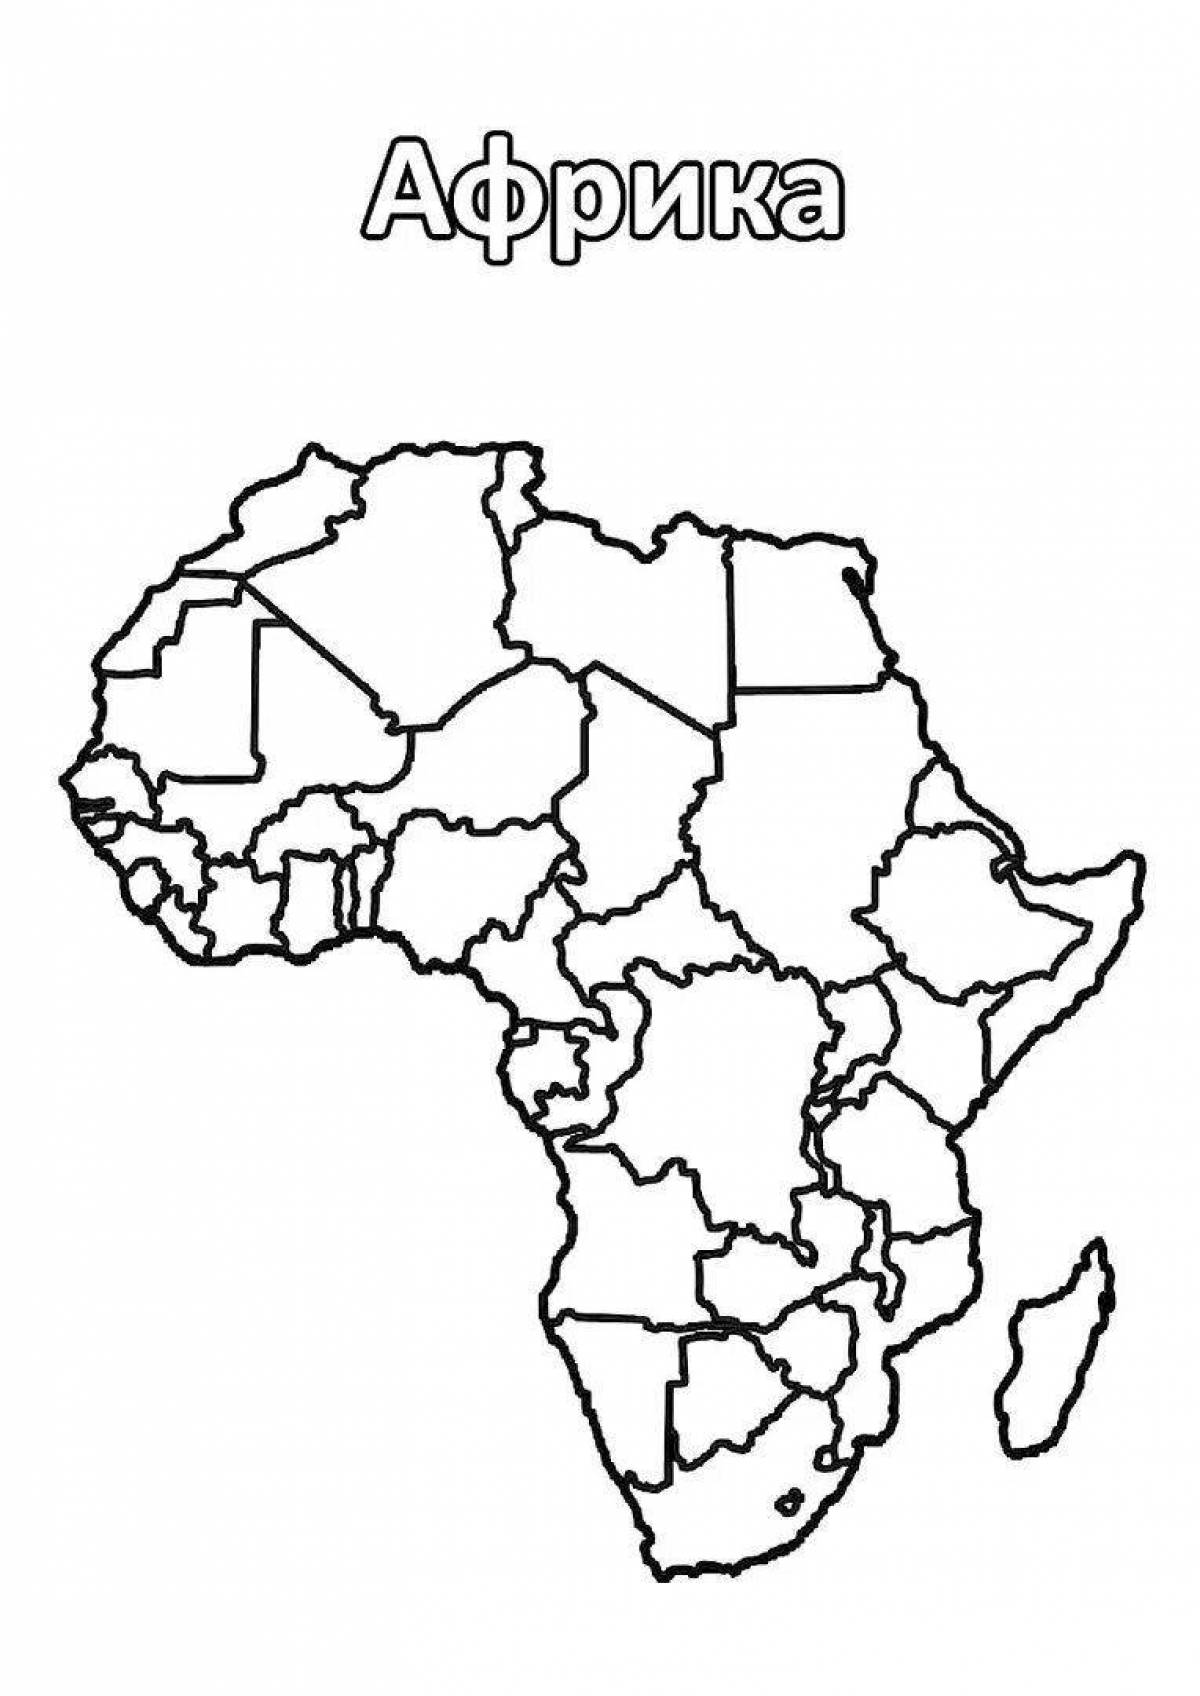 Mainland africa majestic coloring book